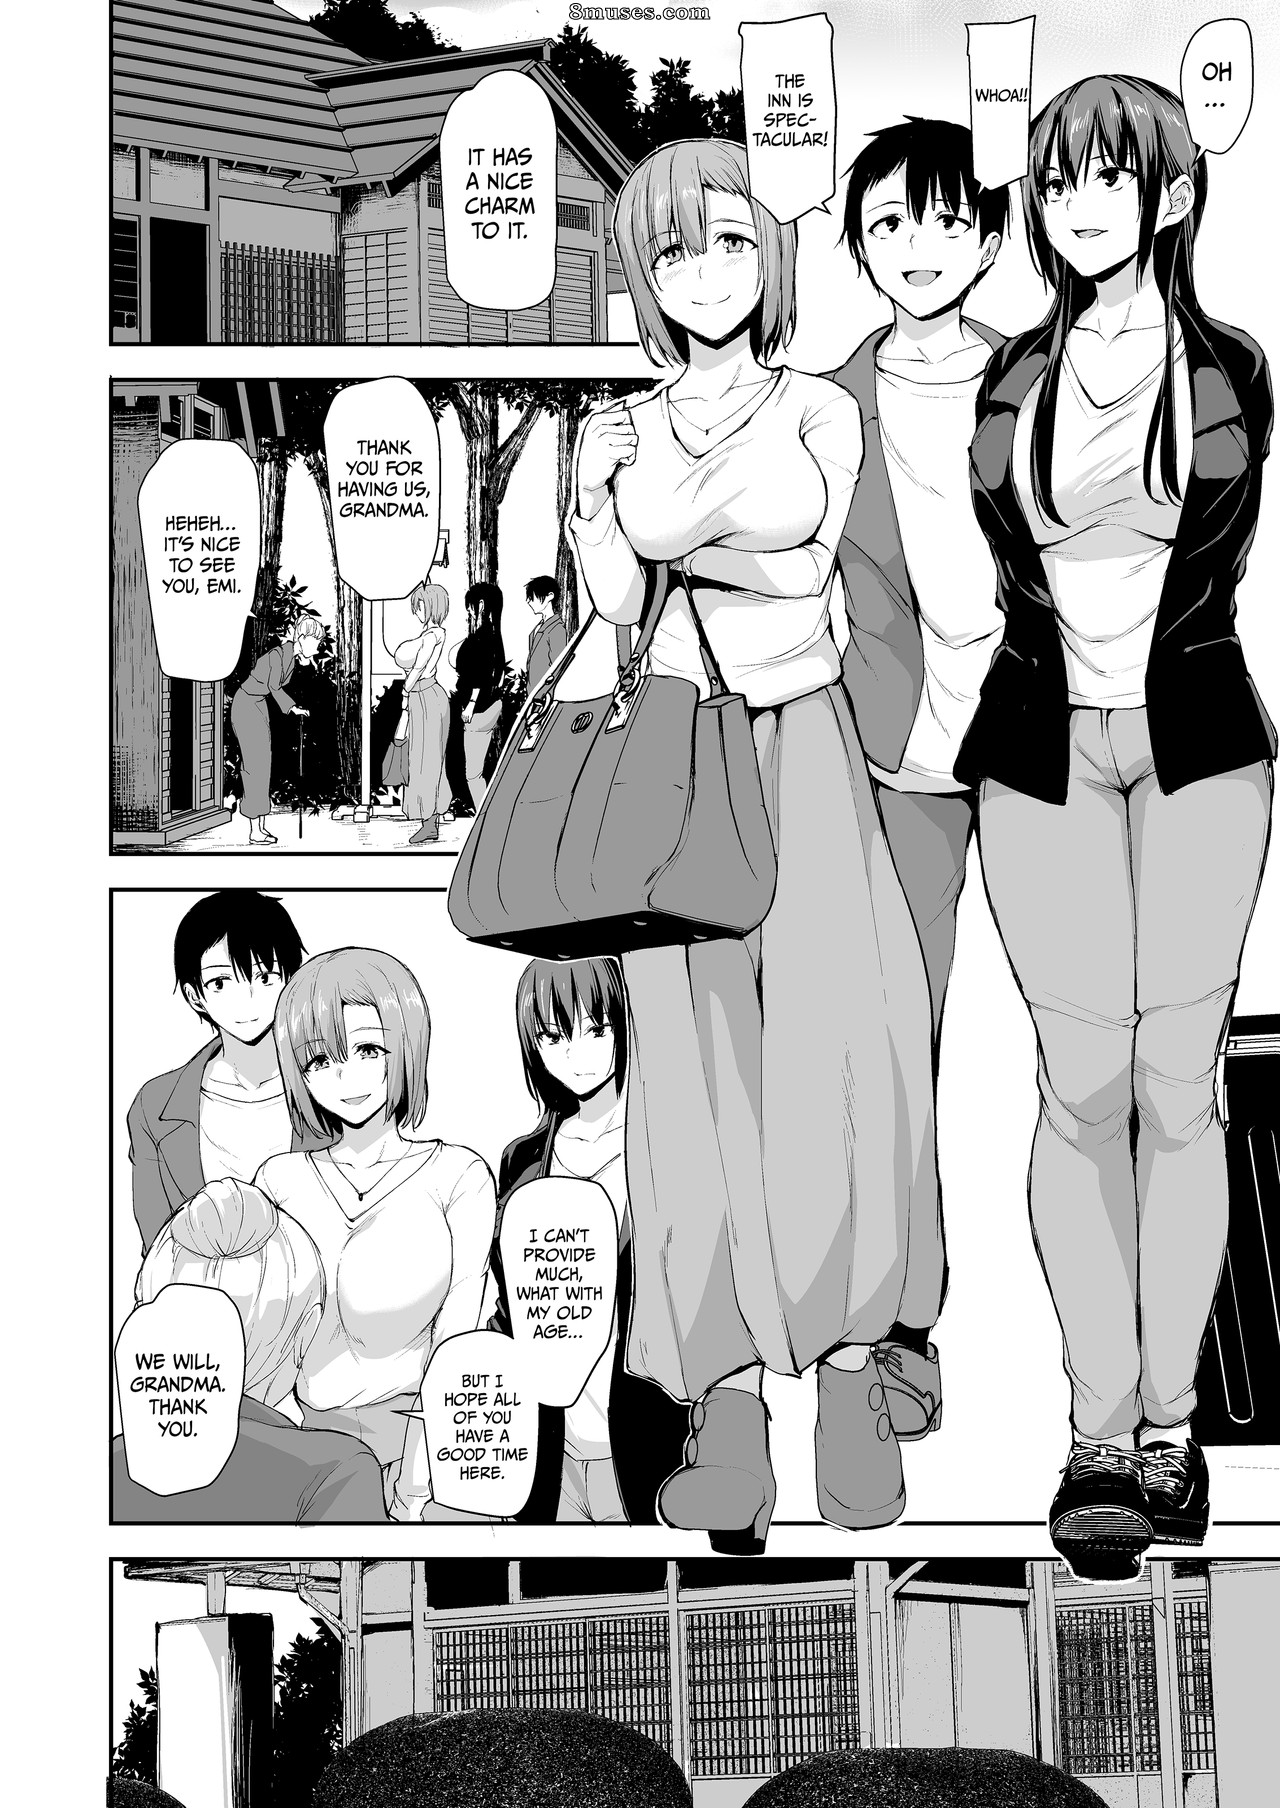 Page 5 Fakku-Comics/SHIMA-PAN-Tachibana-Omina/I-Cant-Get-it-Up-Without-Two-Pairs-of-Big- Breasts-So-My-Wife-Brought-Her-Friend-2 8muses pic